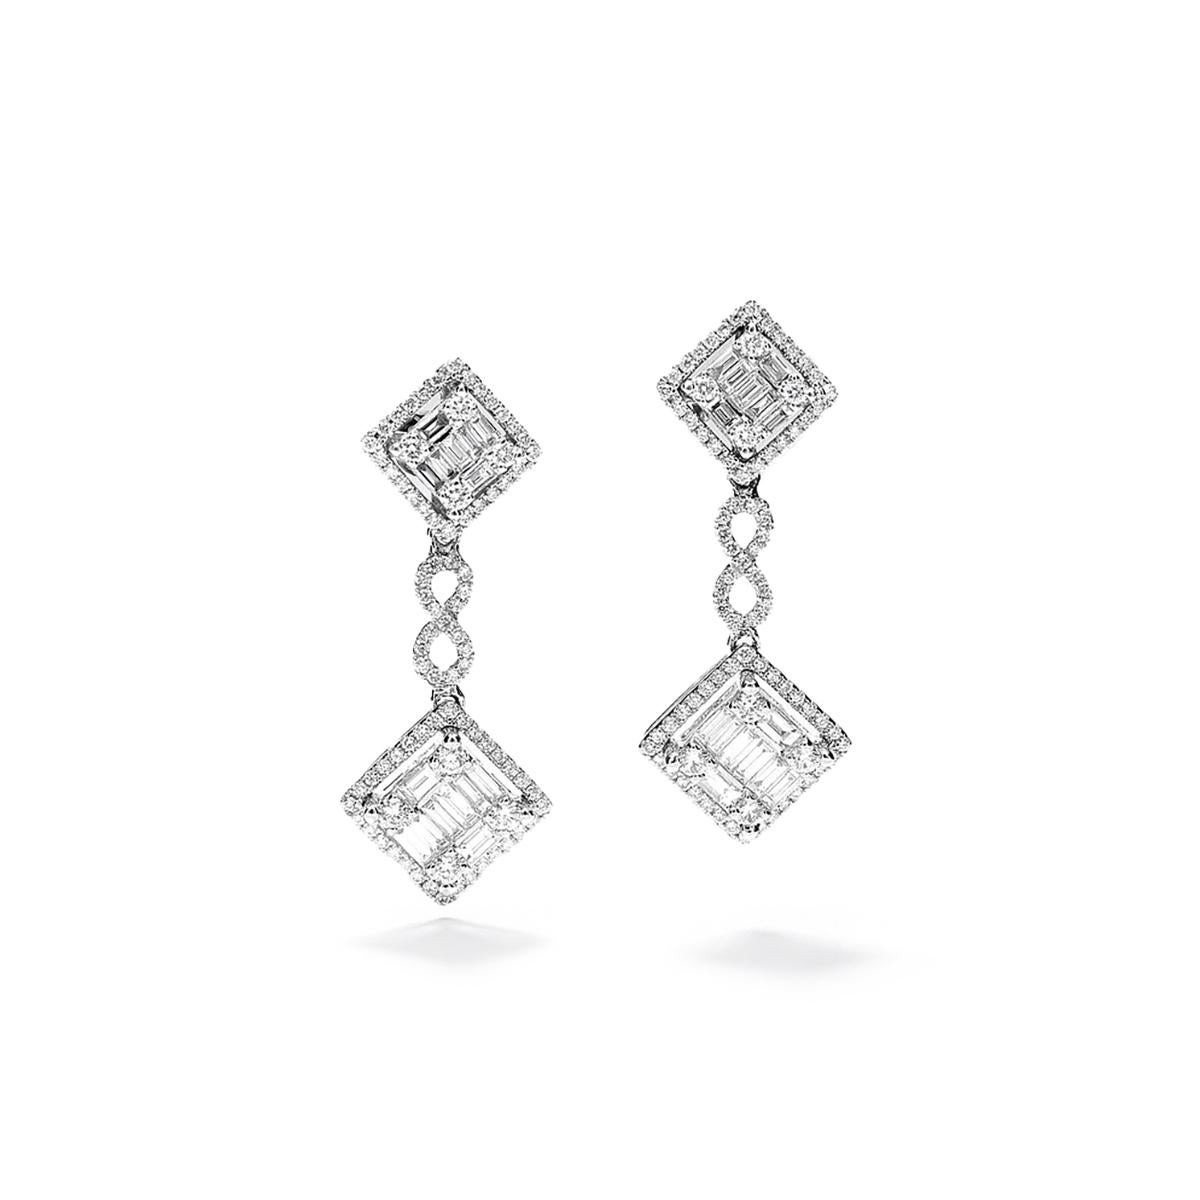 Earrings in 18kt white gold set with 30 baguette cut diamonds 1.03 cts and 166 diamonds 1.15 cts